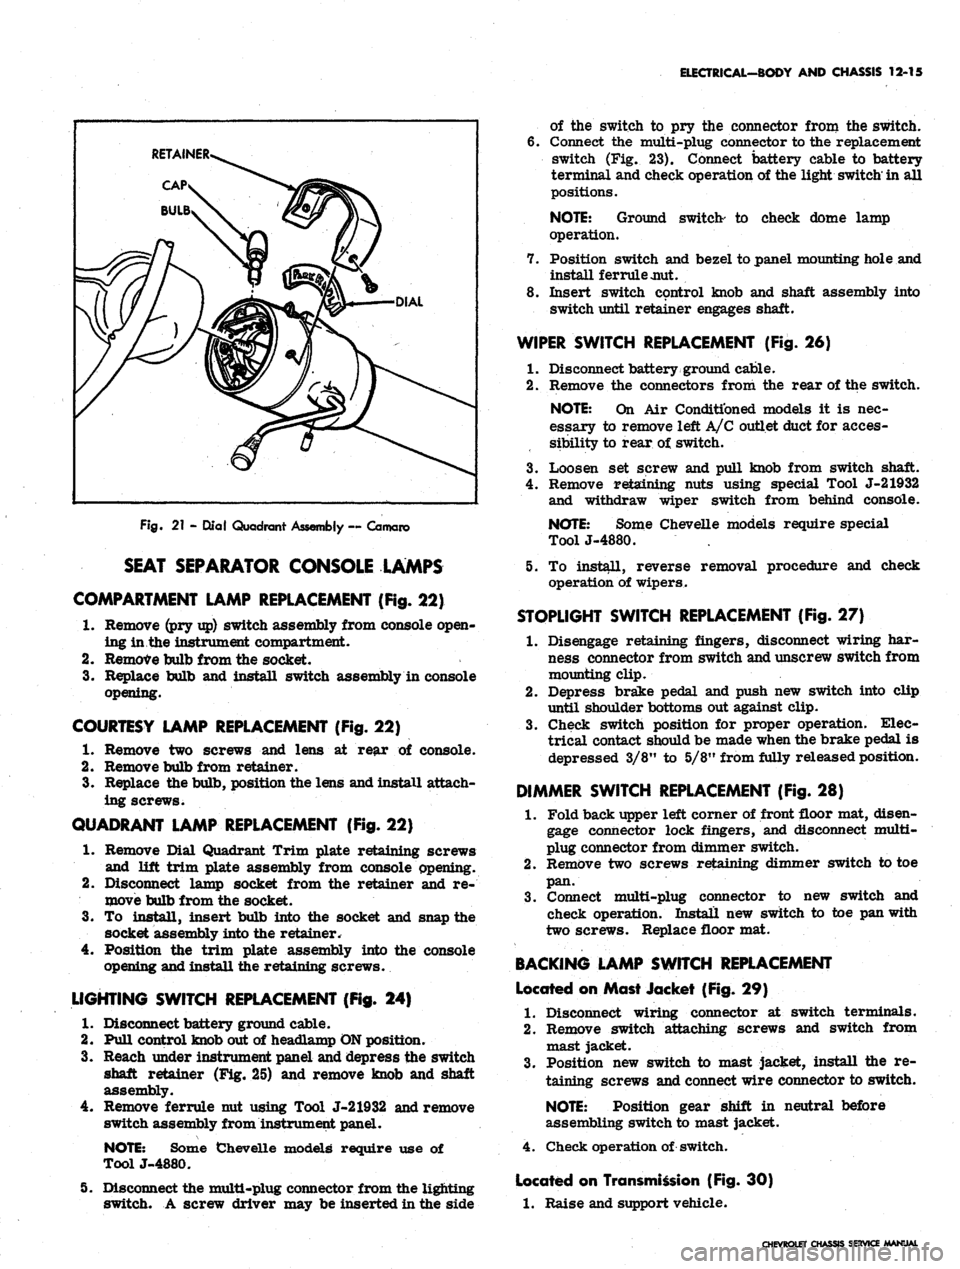 CHEVROLET CAMARO 1967 1.G Chassis User Guide 
ELECTRICAL-BODY AND CHASSIS 12-15

Fig.
 21 - Qlal Quadrant Assembly ~ Camaro

SEAT SEPARATOR CONSOLE LAMPS

COMPARTMENT LAMP REPLACEMENT (Fig.
 22)

1.
 Remove (pry up) switch assembly from console 